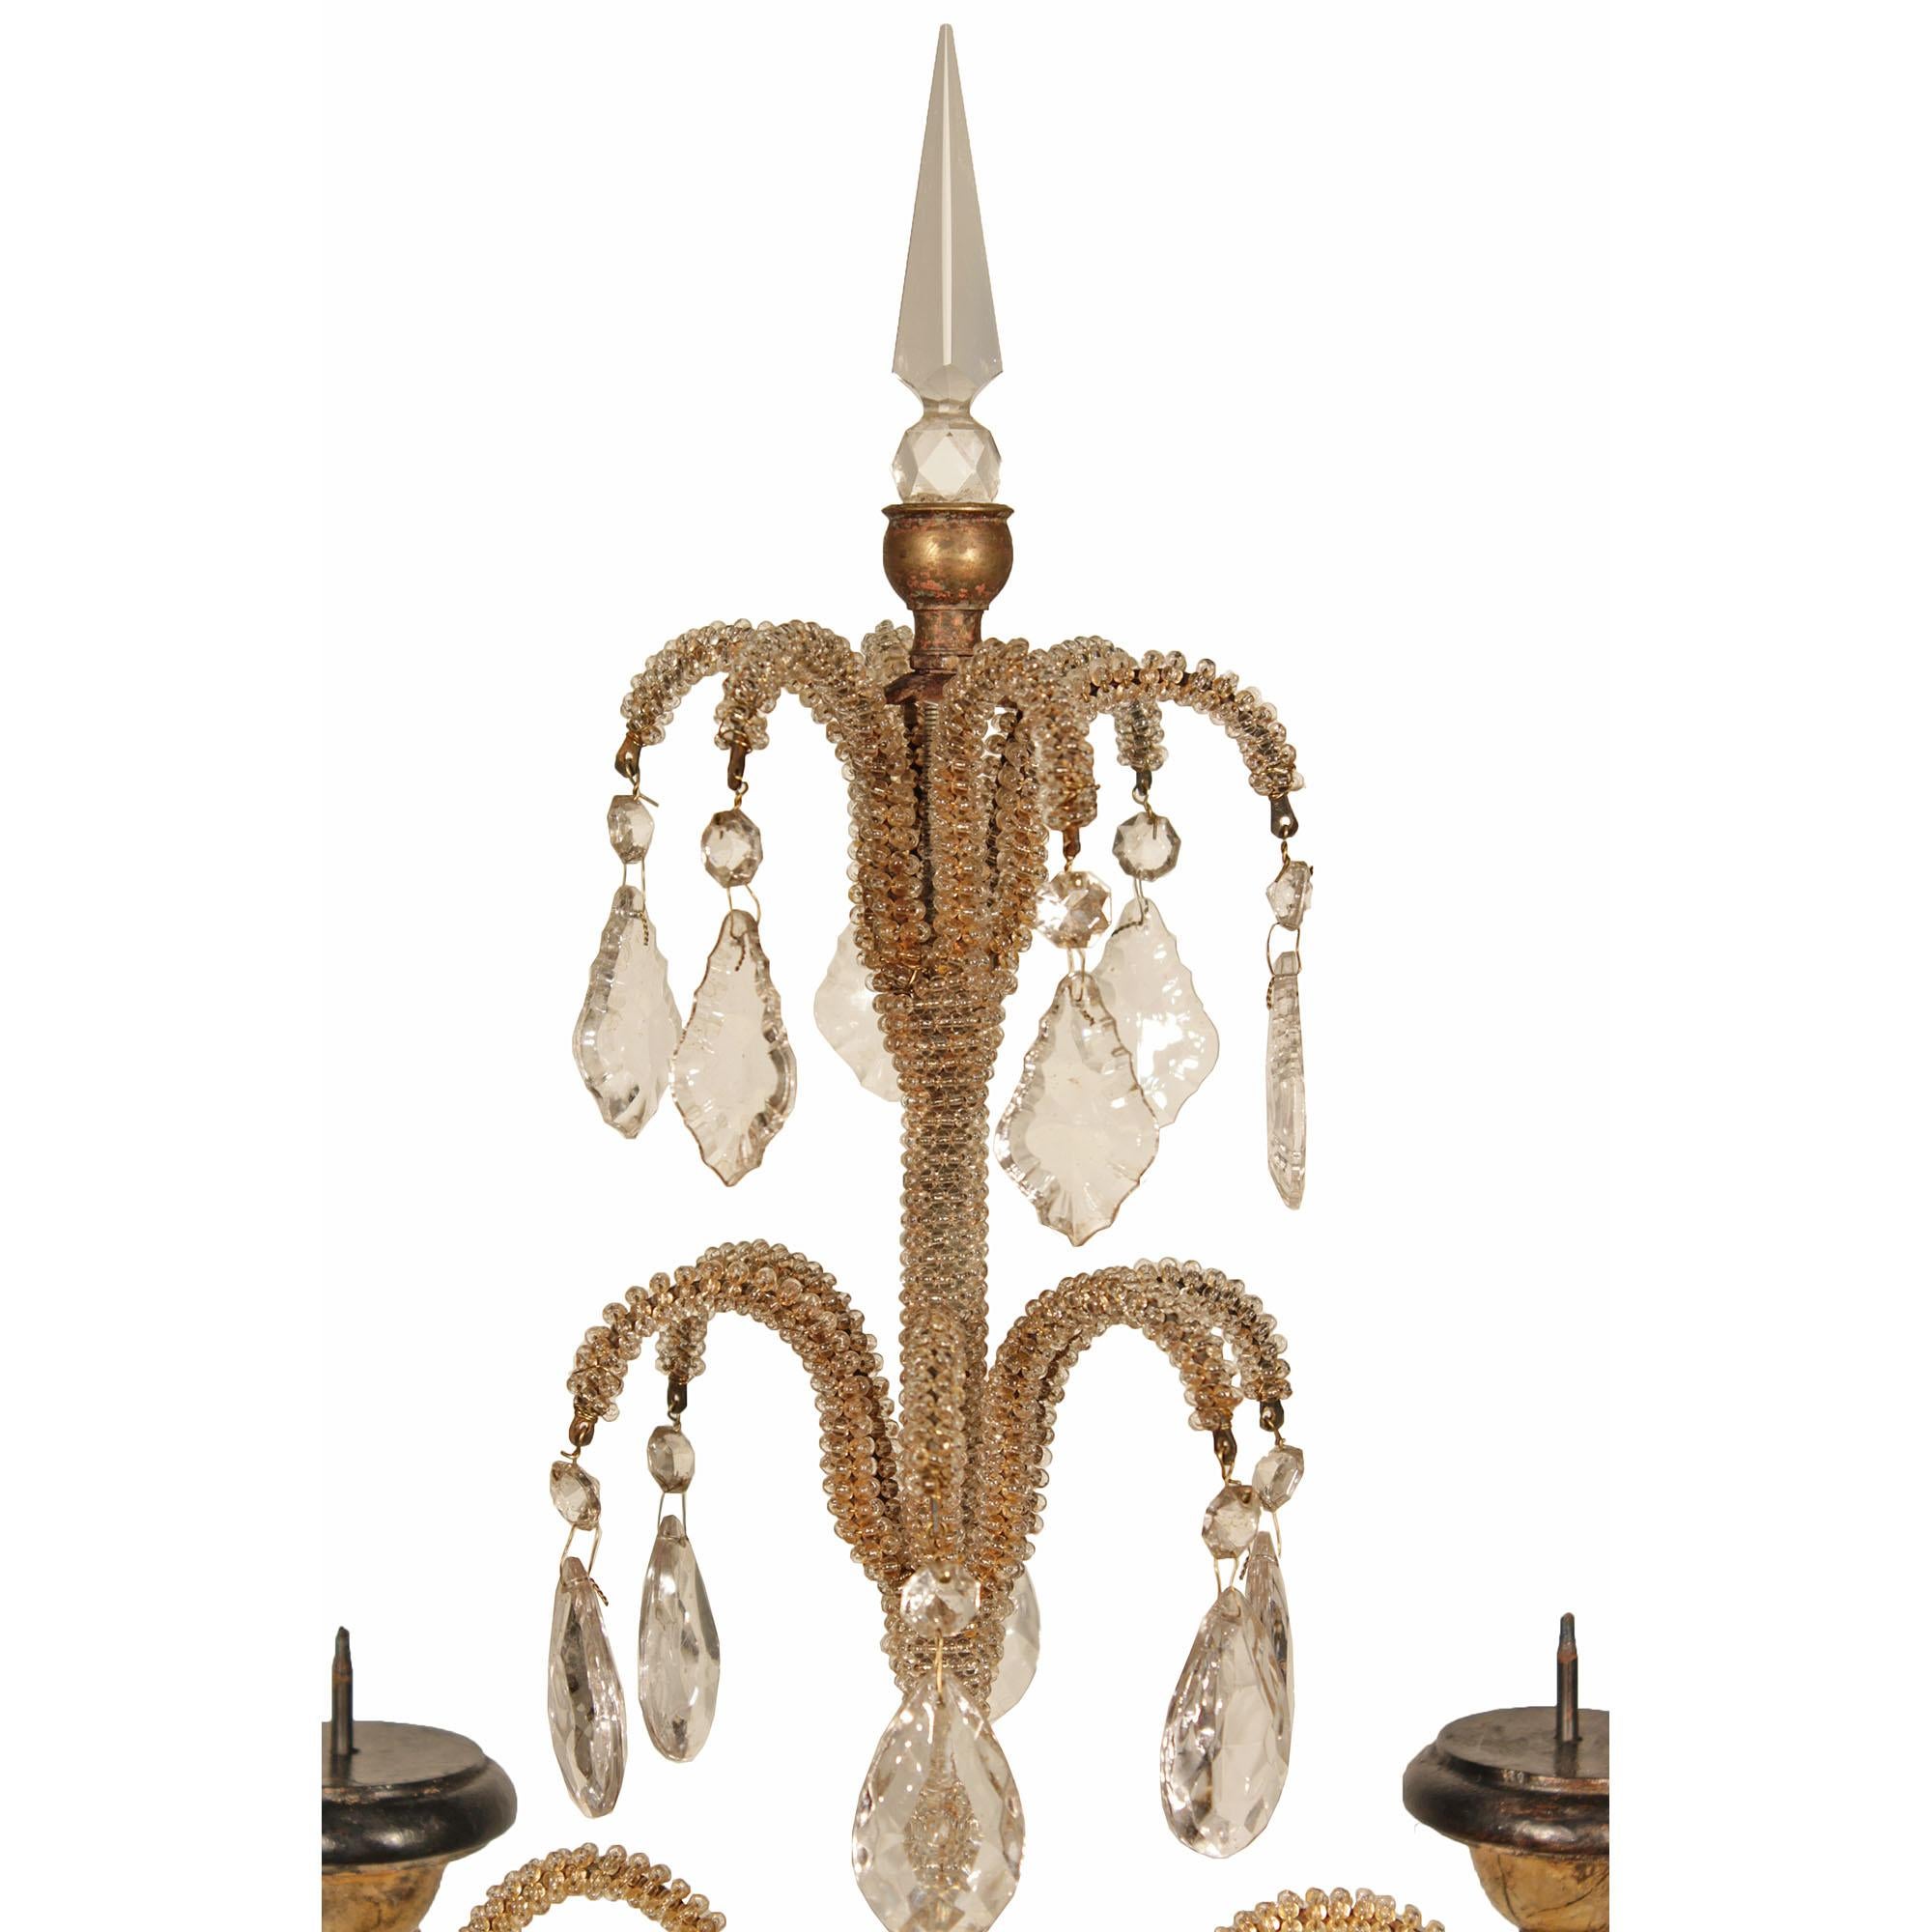 A sensational pair of Italian Louis XVI st. four arm candelabras. Each candelabra is raised by a faux painted marble square base. The mecca and patinated black urn supports the four 'S' scrolled beaded arms which are joined by glass swaging garlands